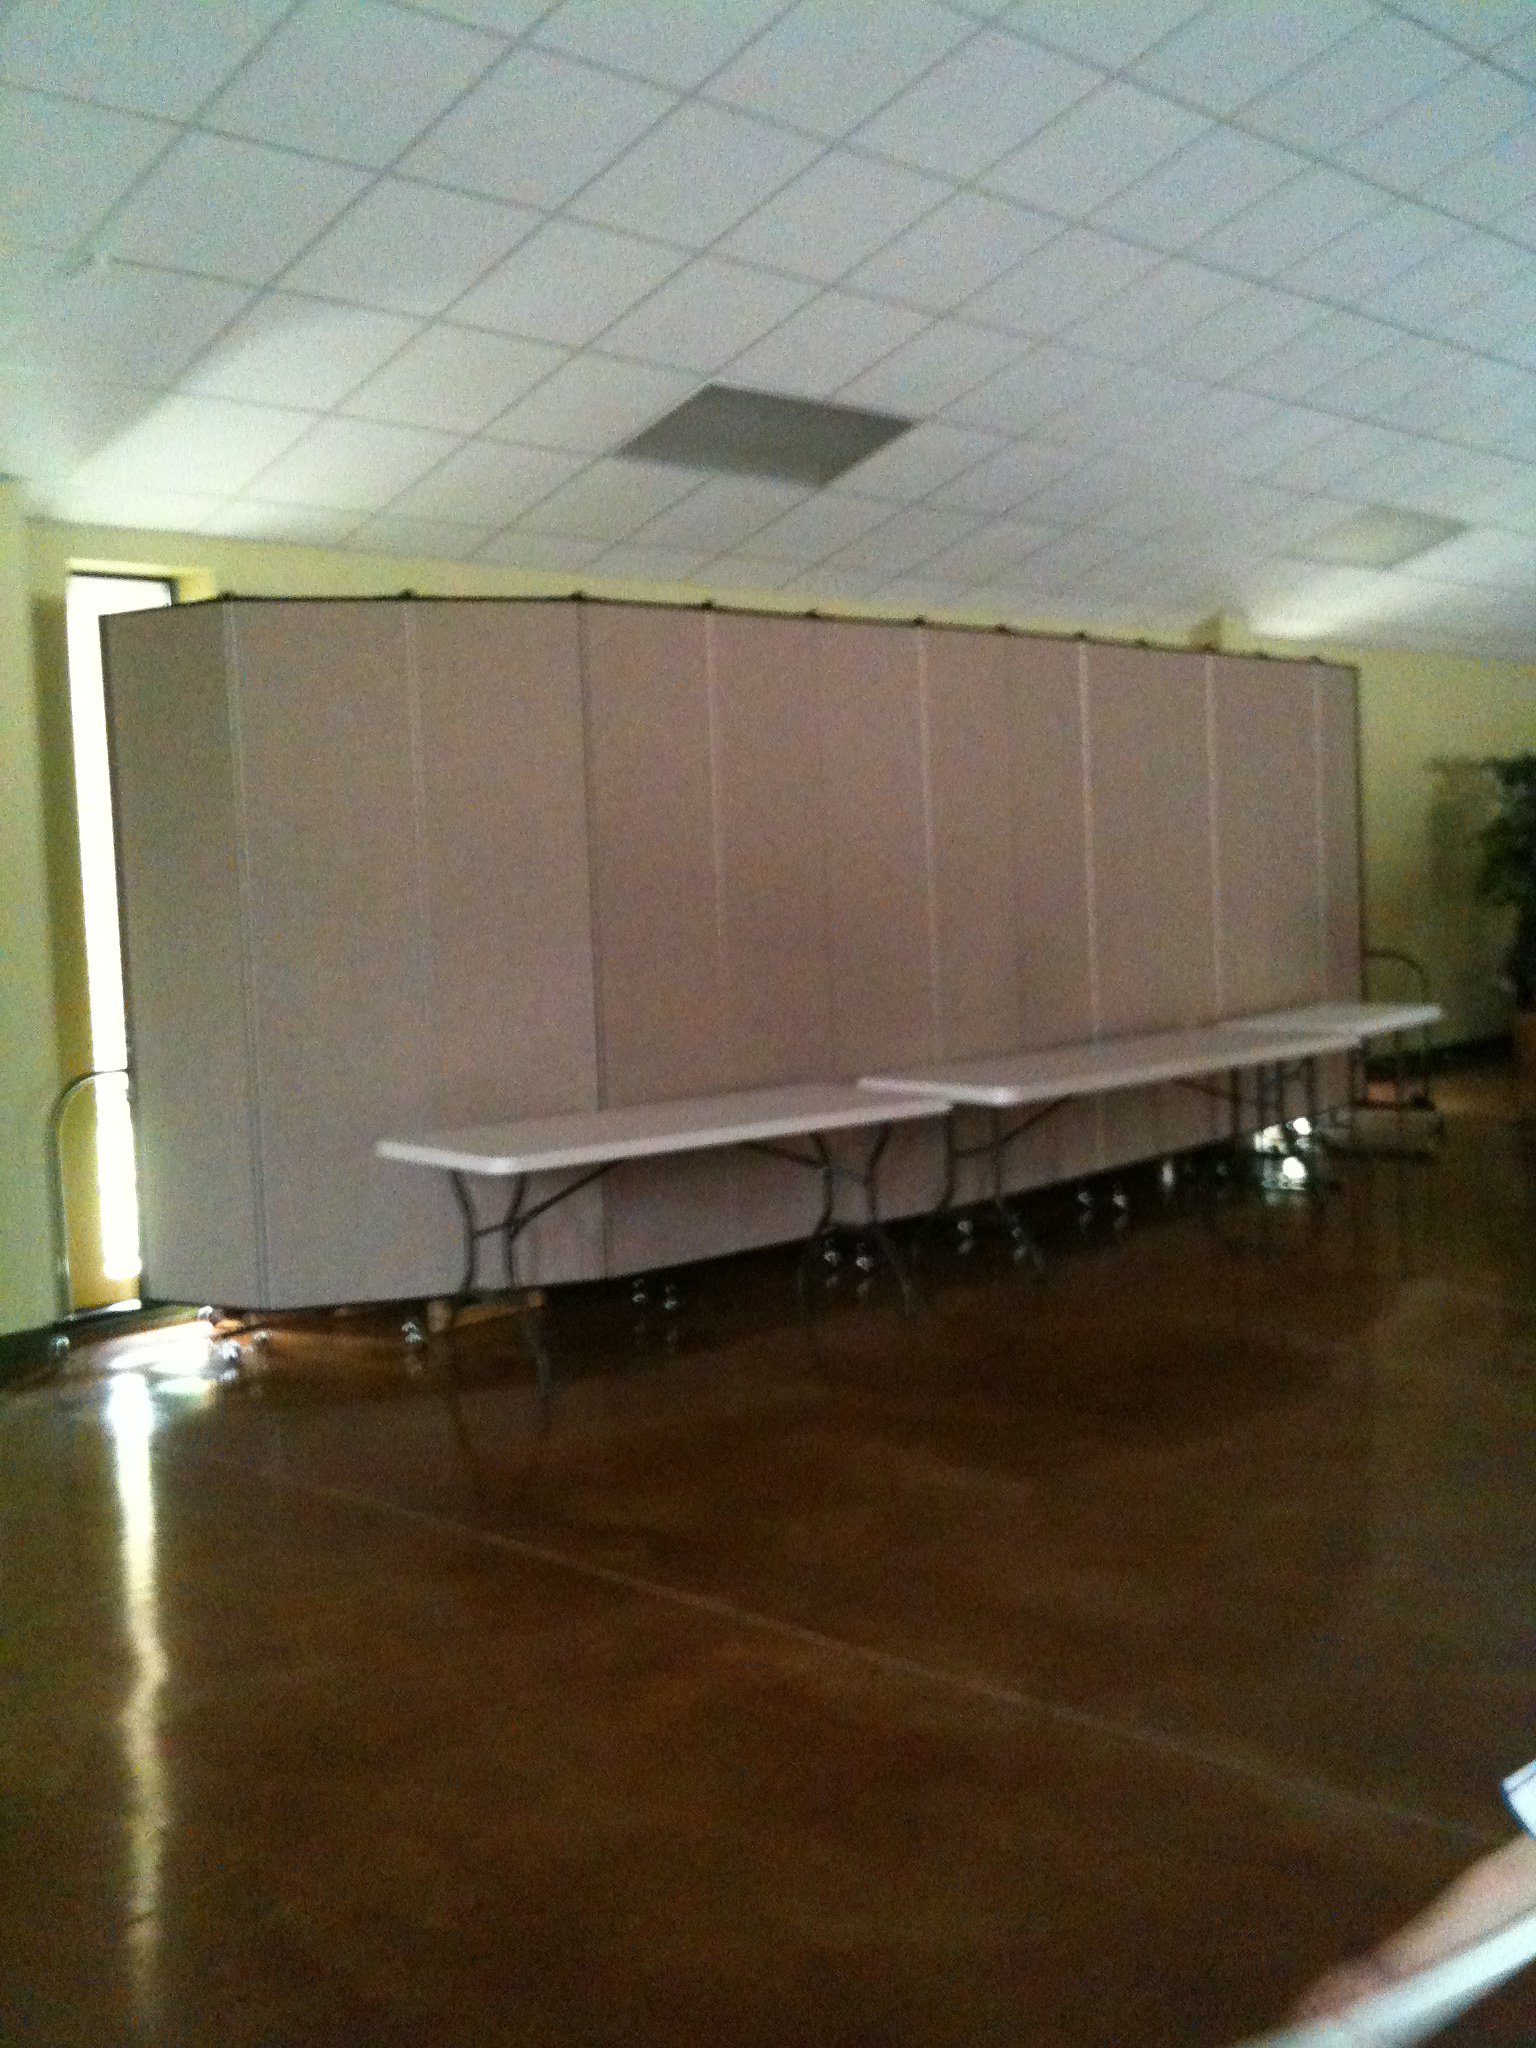 Divider wall protects unused items from view in a banquet hall.